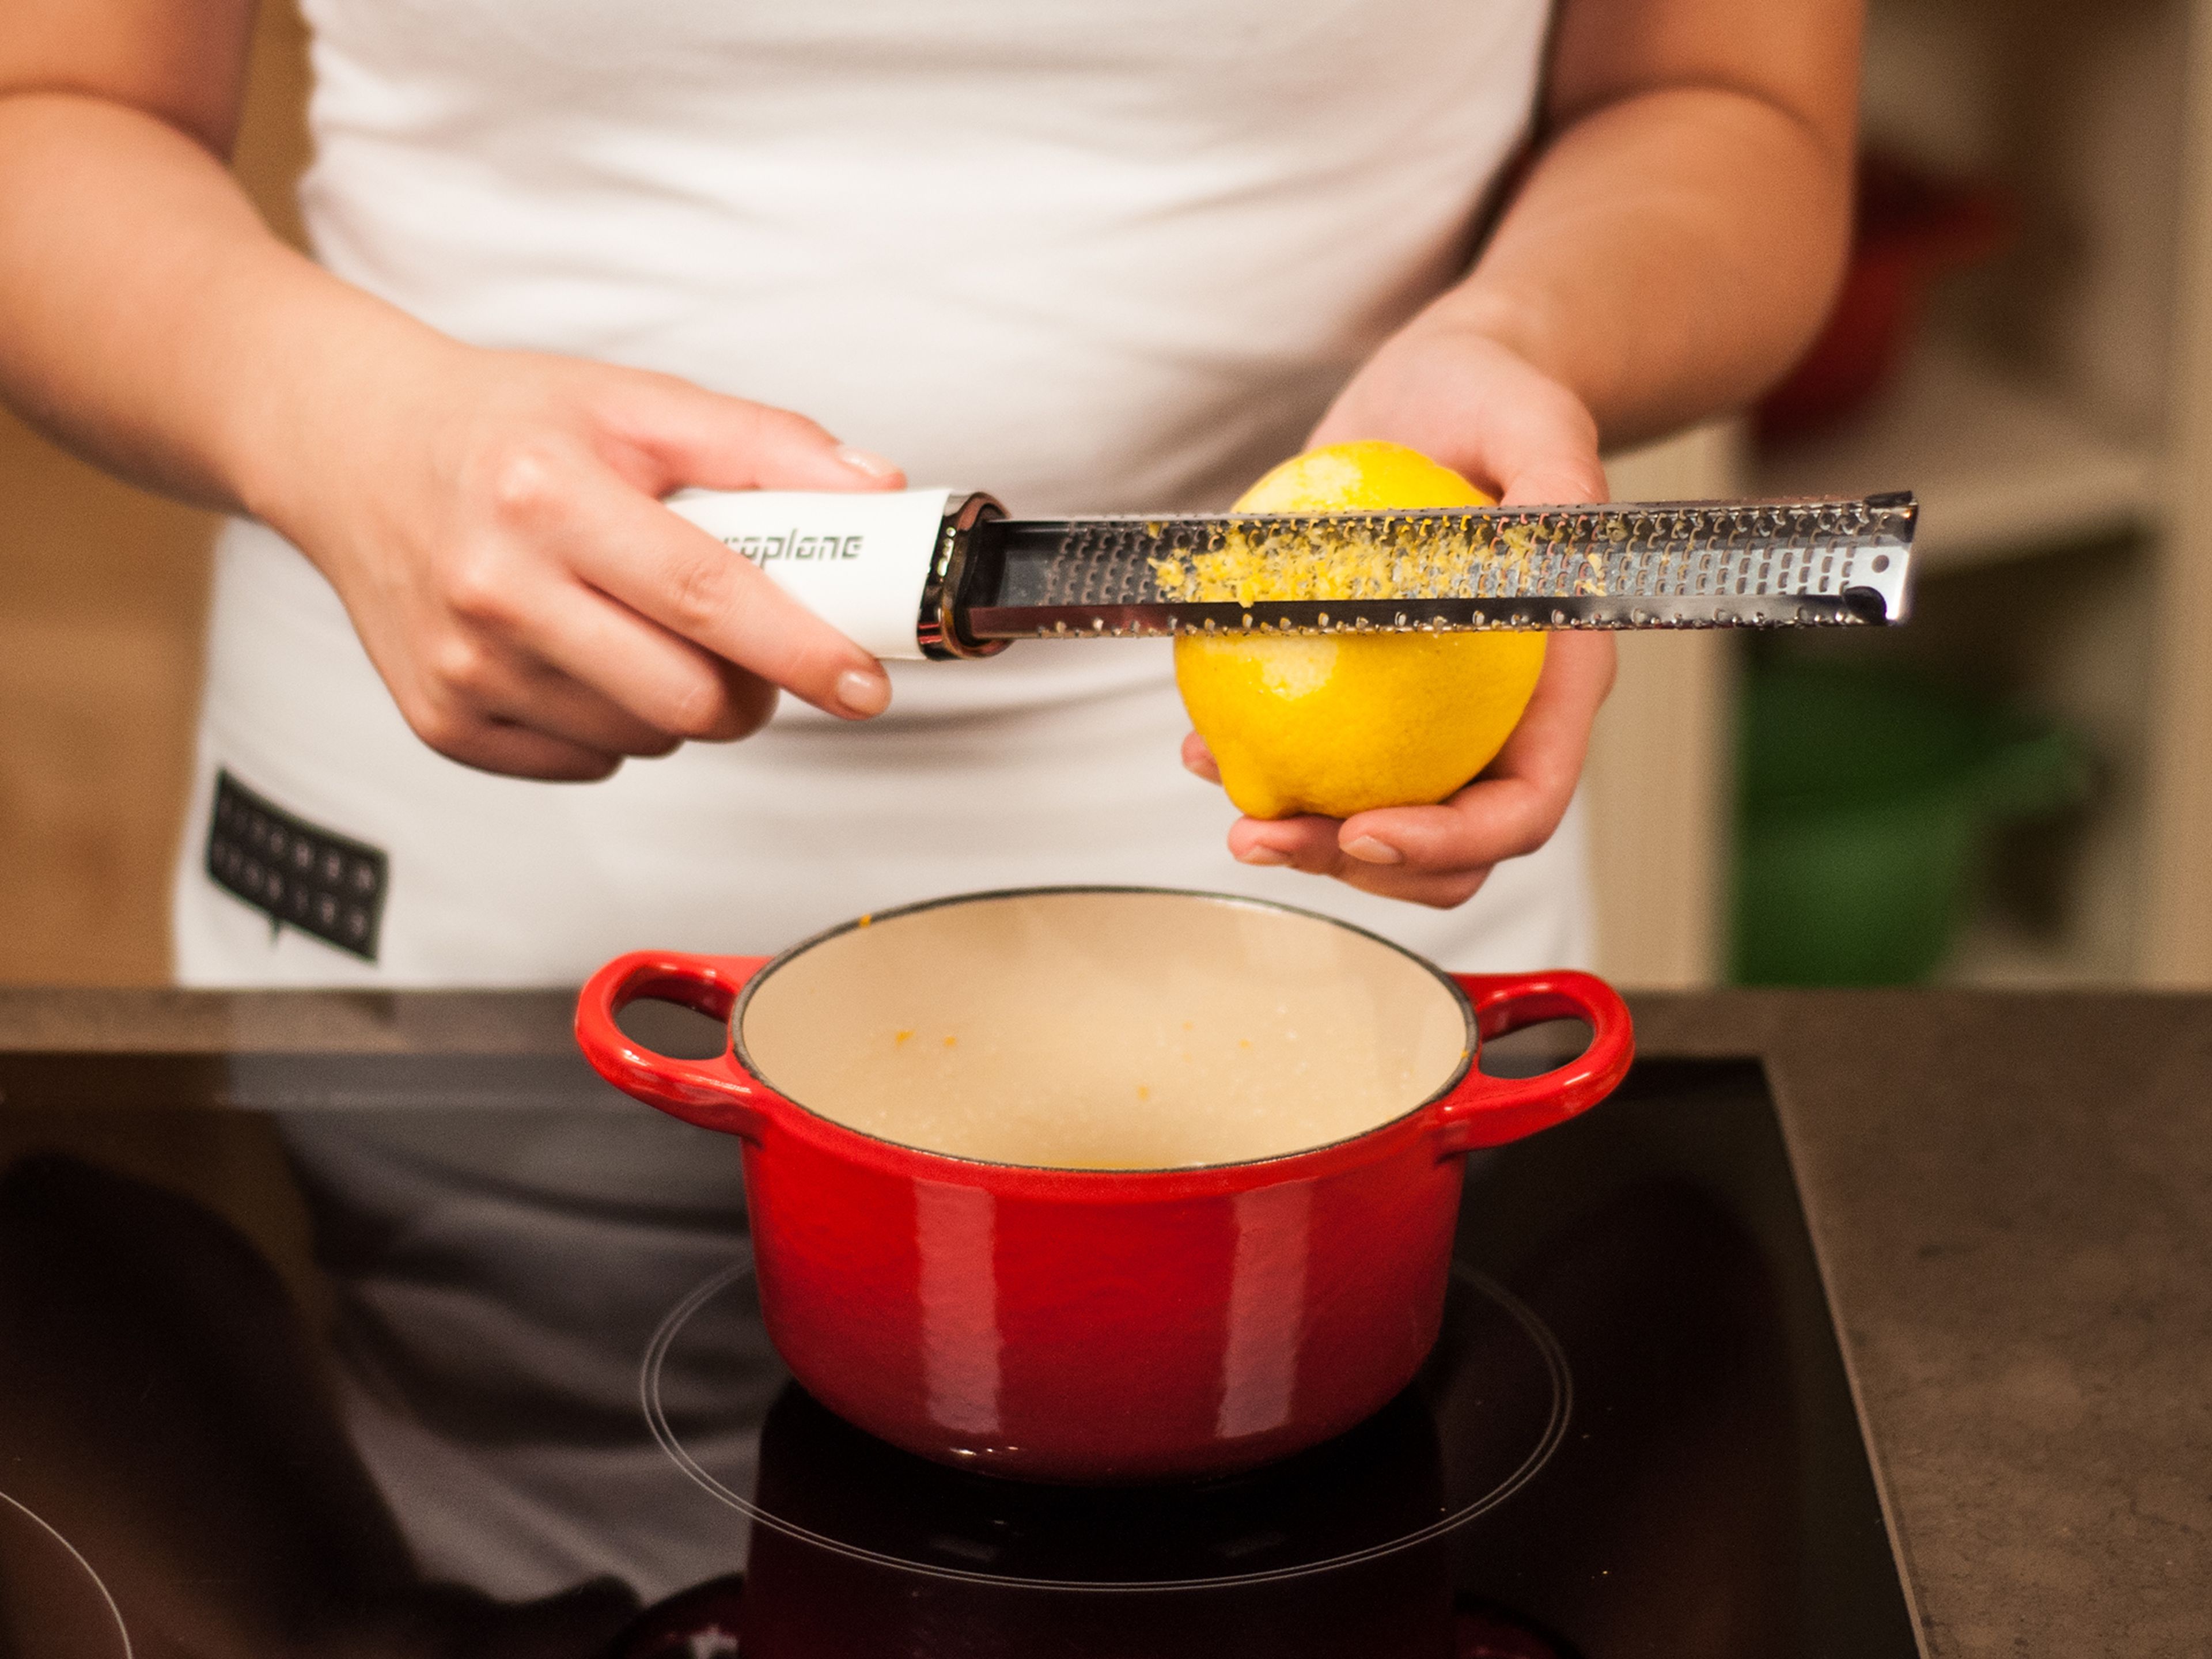 Preheat oven to 190°C/375°F. Melt butter, honey, and sugar in a small saucepan over medium heat, stirring occasionally to prevent burning. Zest orange and lemon into saucepan, add salt, and stir to combine. Remove from heat.